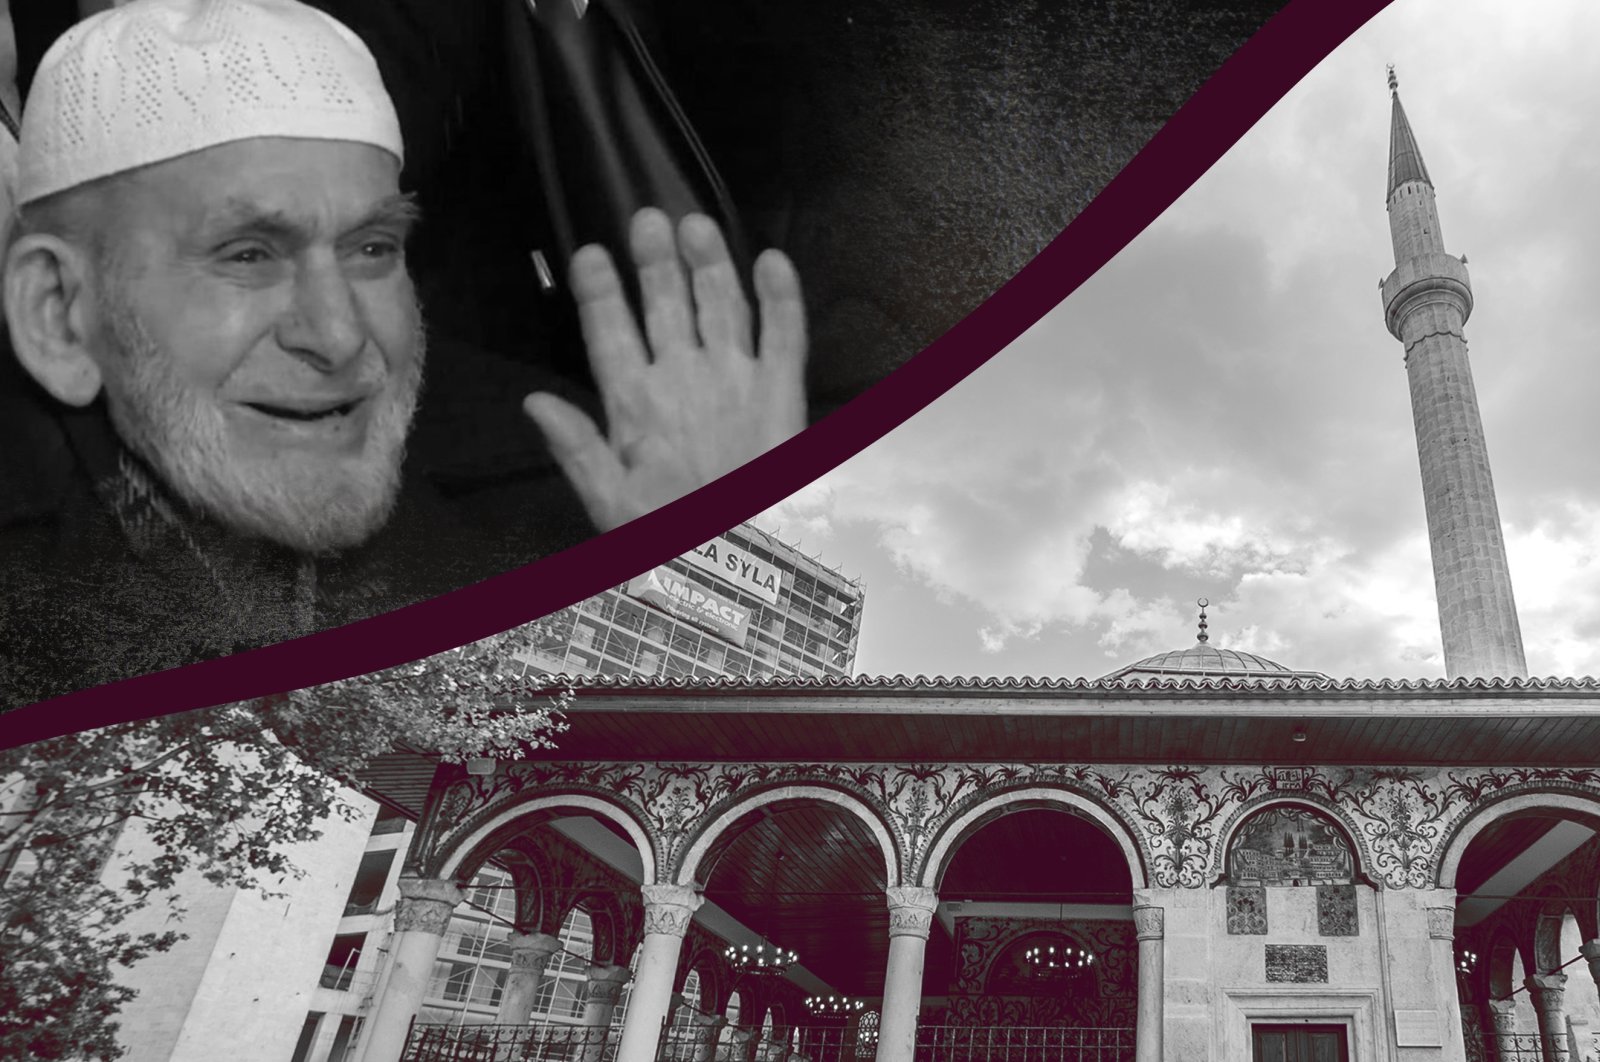 In this photo illustration prepared by Büşra Öztürk, an elderly Albanian man is seen on the left crying at the inauguration ceremony of the Ottoman-era Ethem Bey Mosque seen on the right, Tirana, Albania, Jan. 20, 2022. (Daily Sabah Photo)